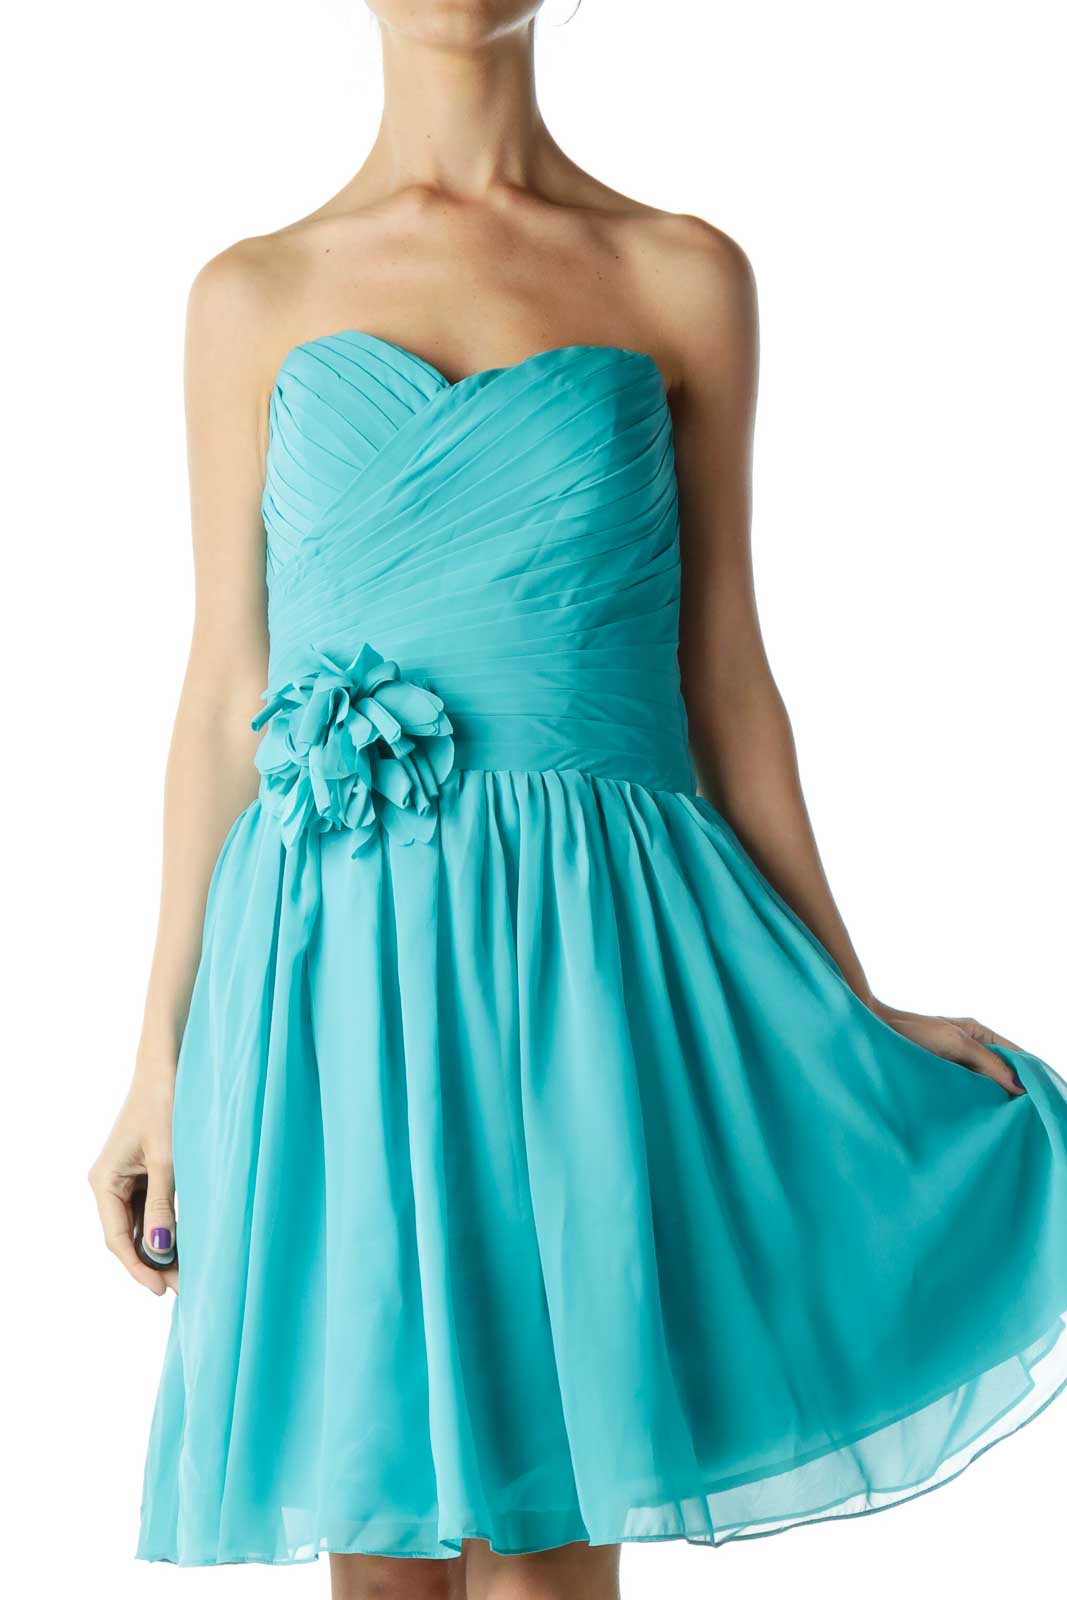 Turquoise Strapless Cocktail Dress with Flower Detail  Front